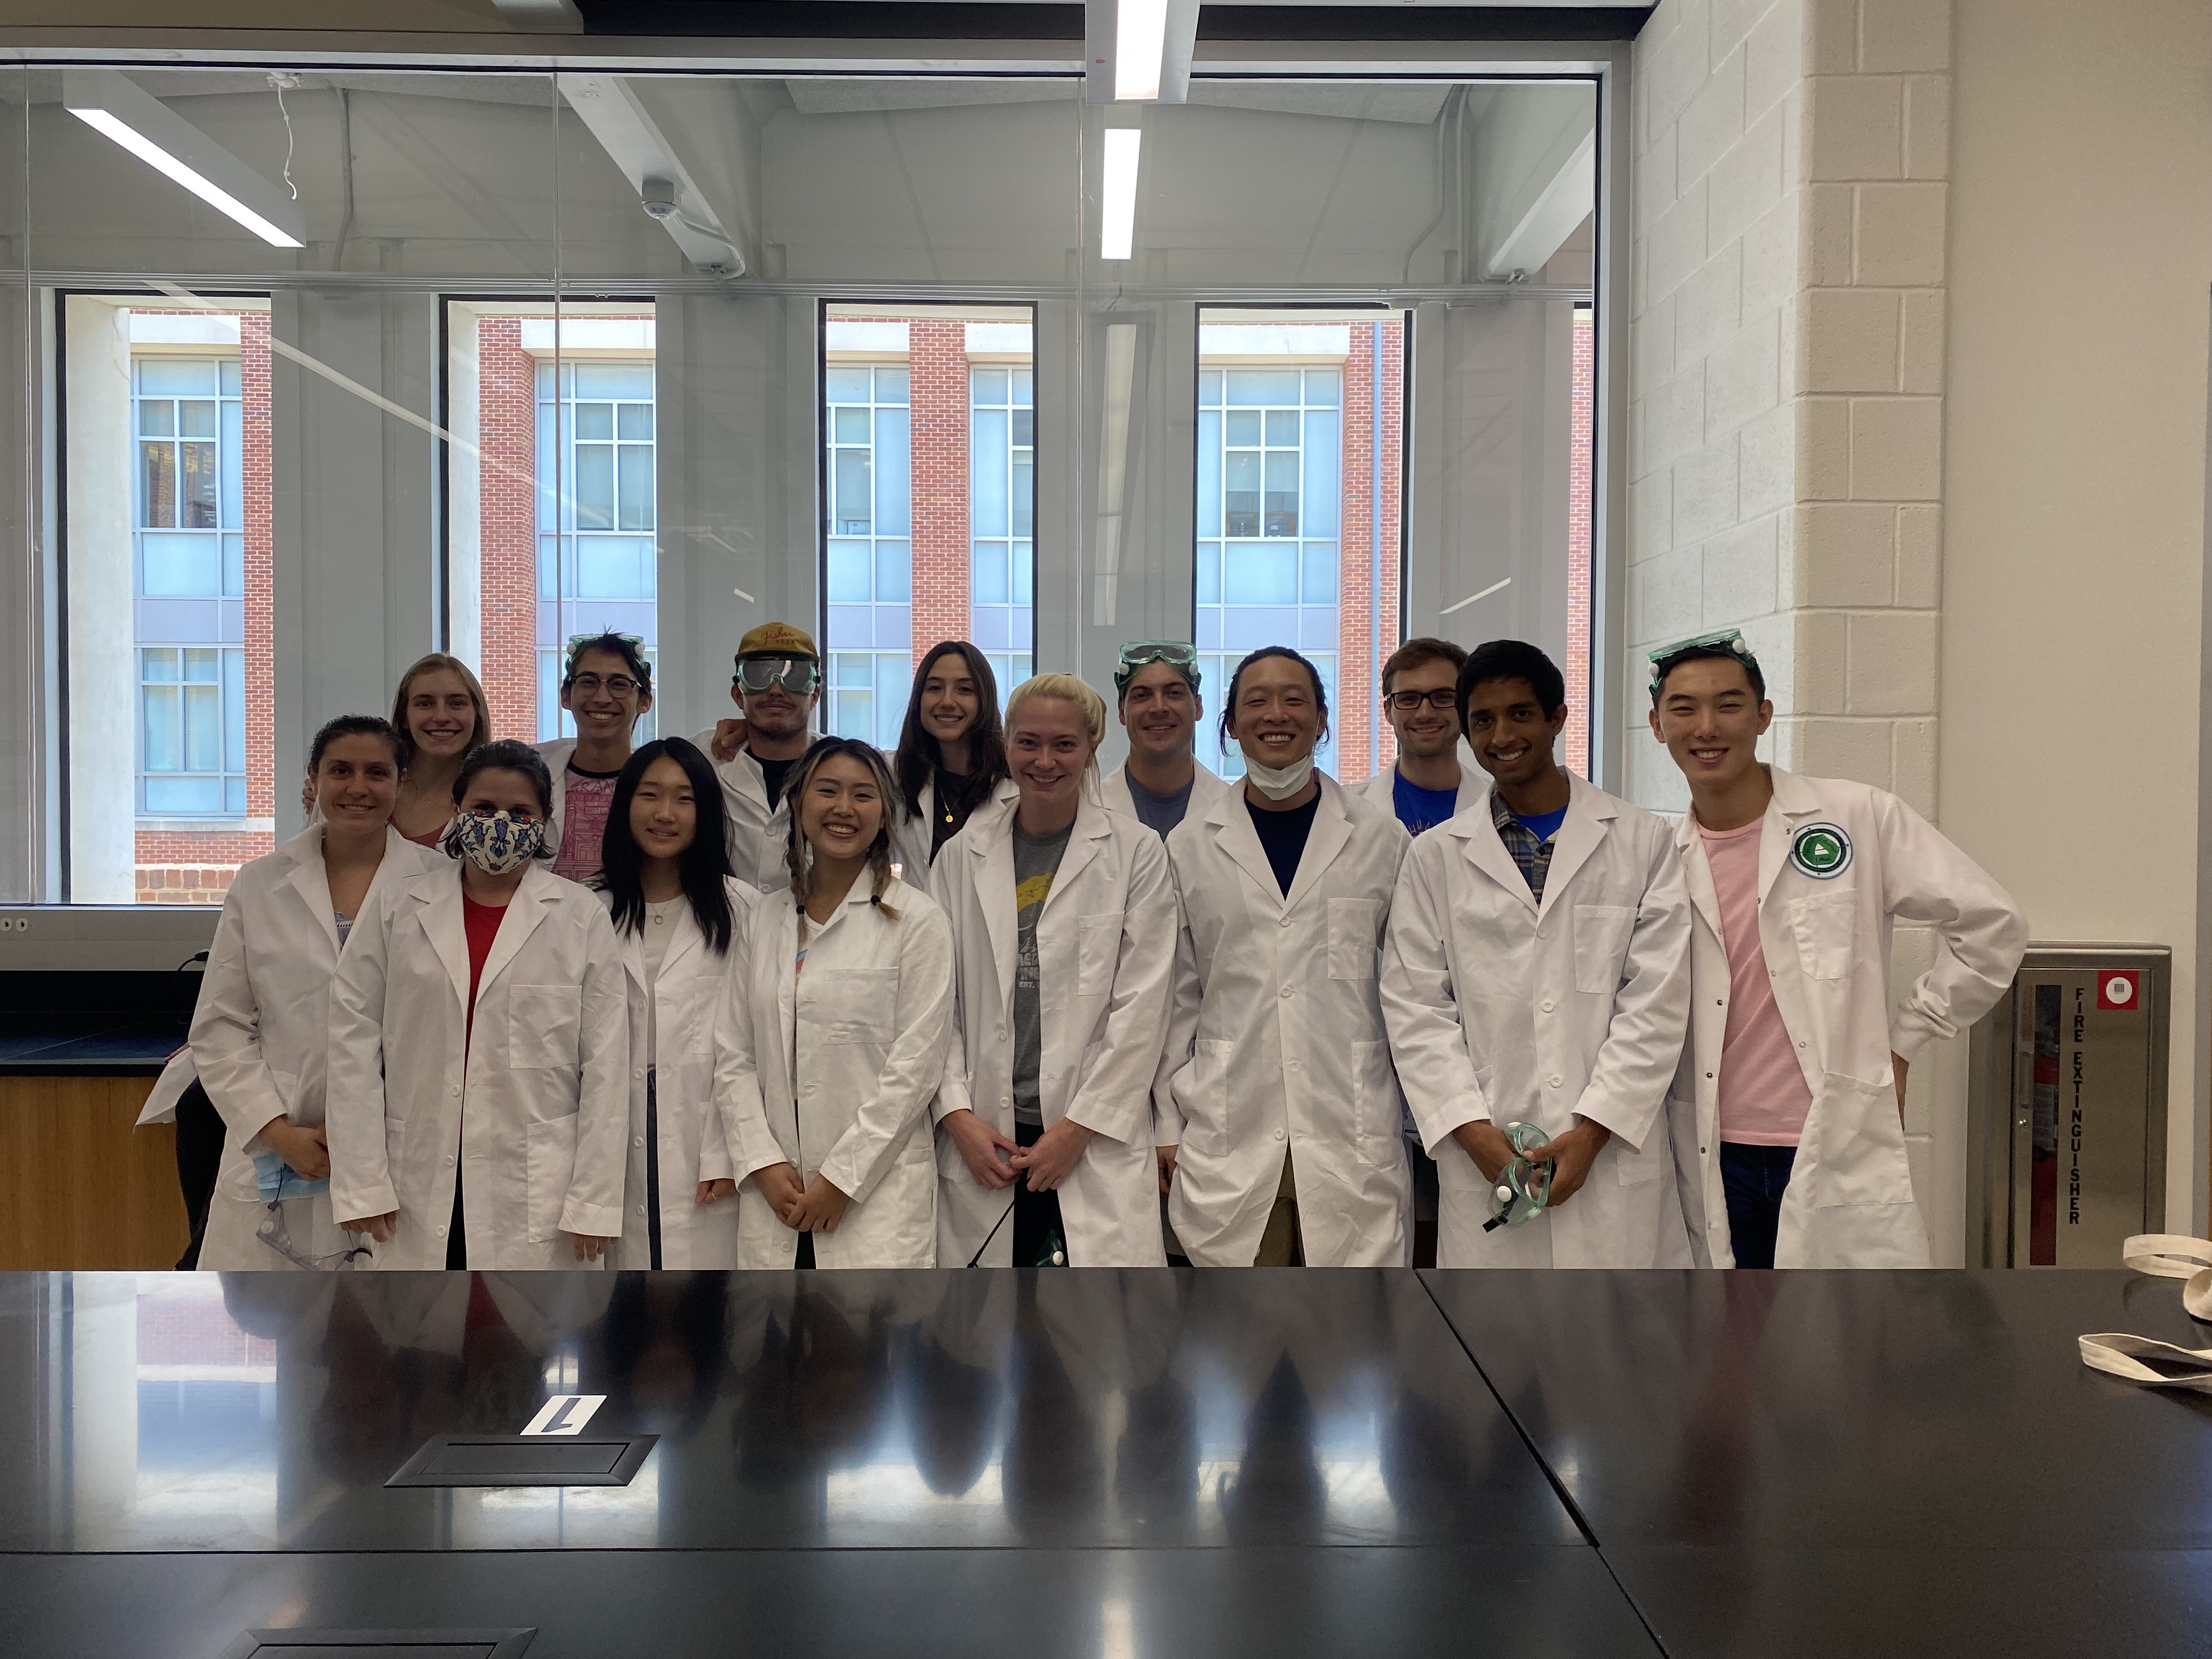 Group of post bacc pre-med students in white coats smiling at camera in medical classroom